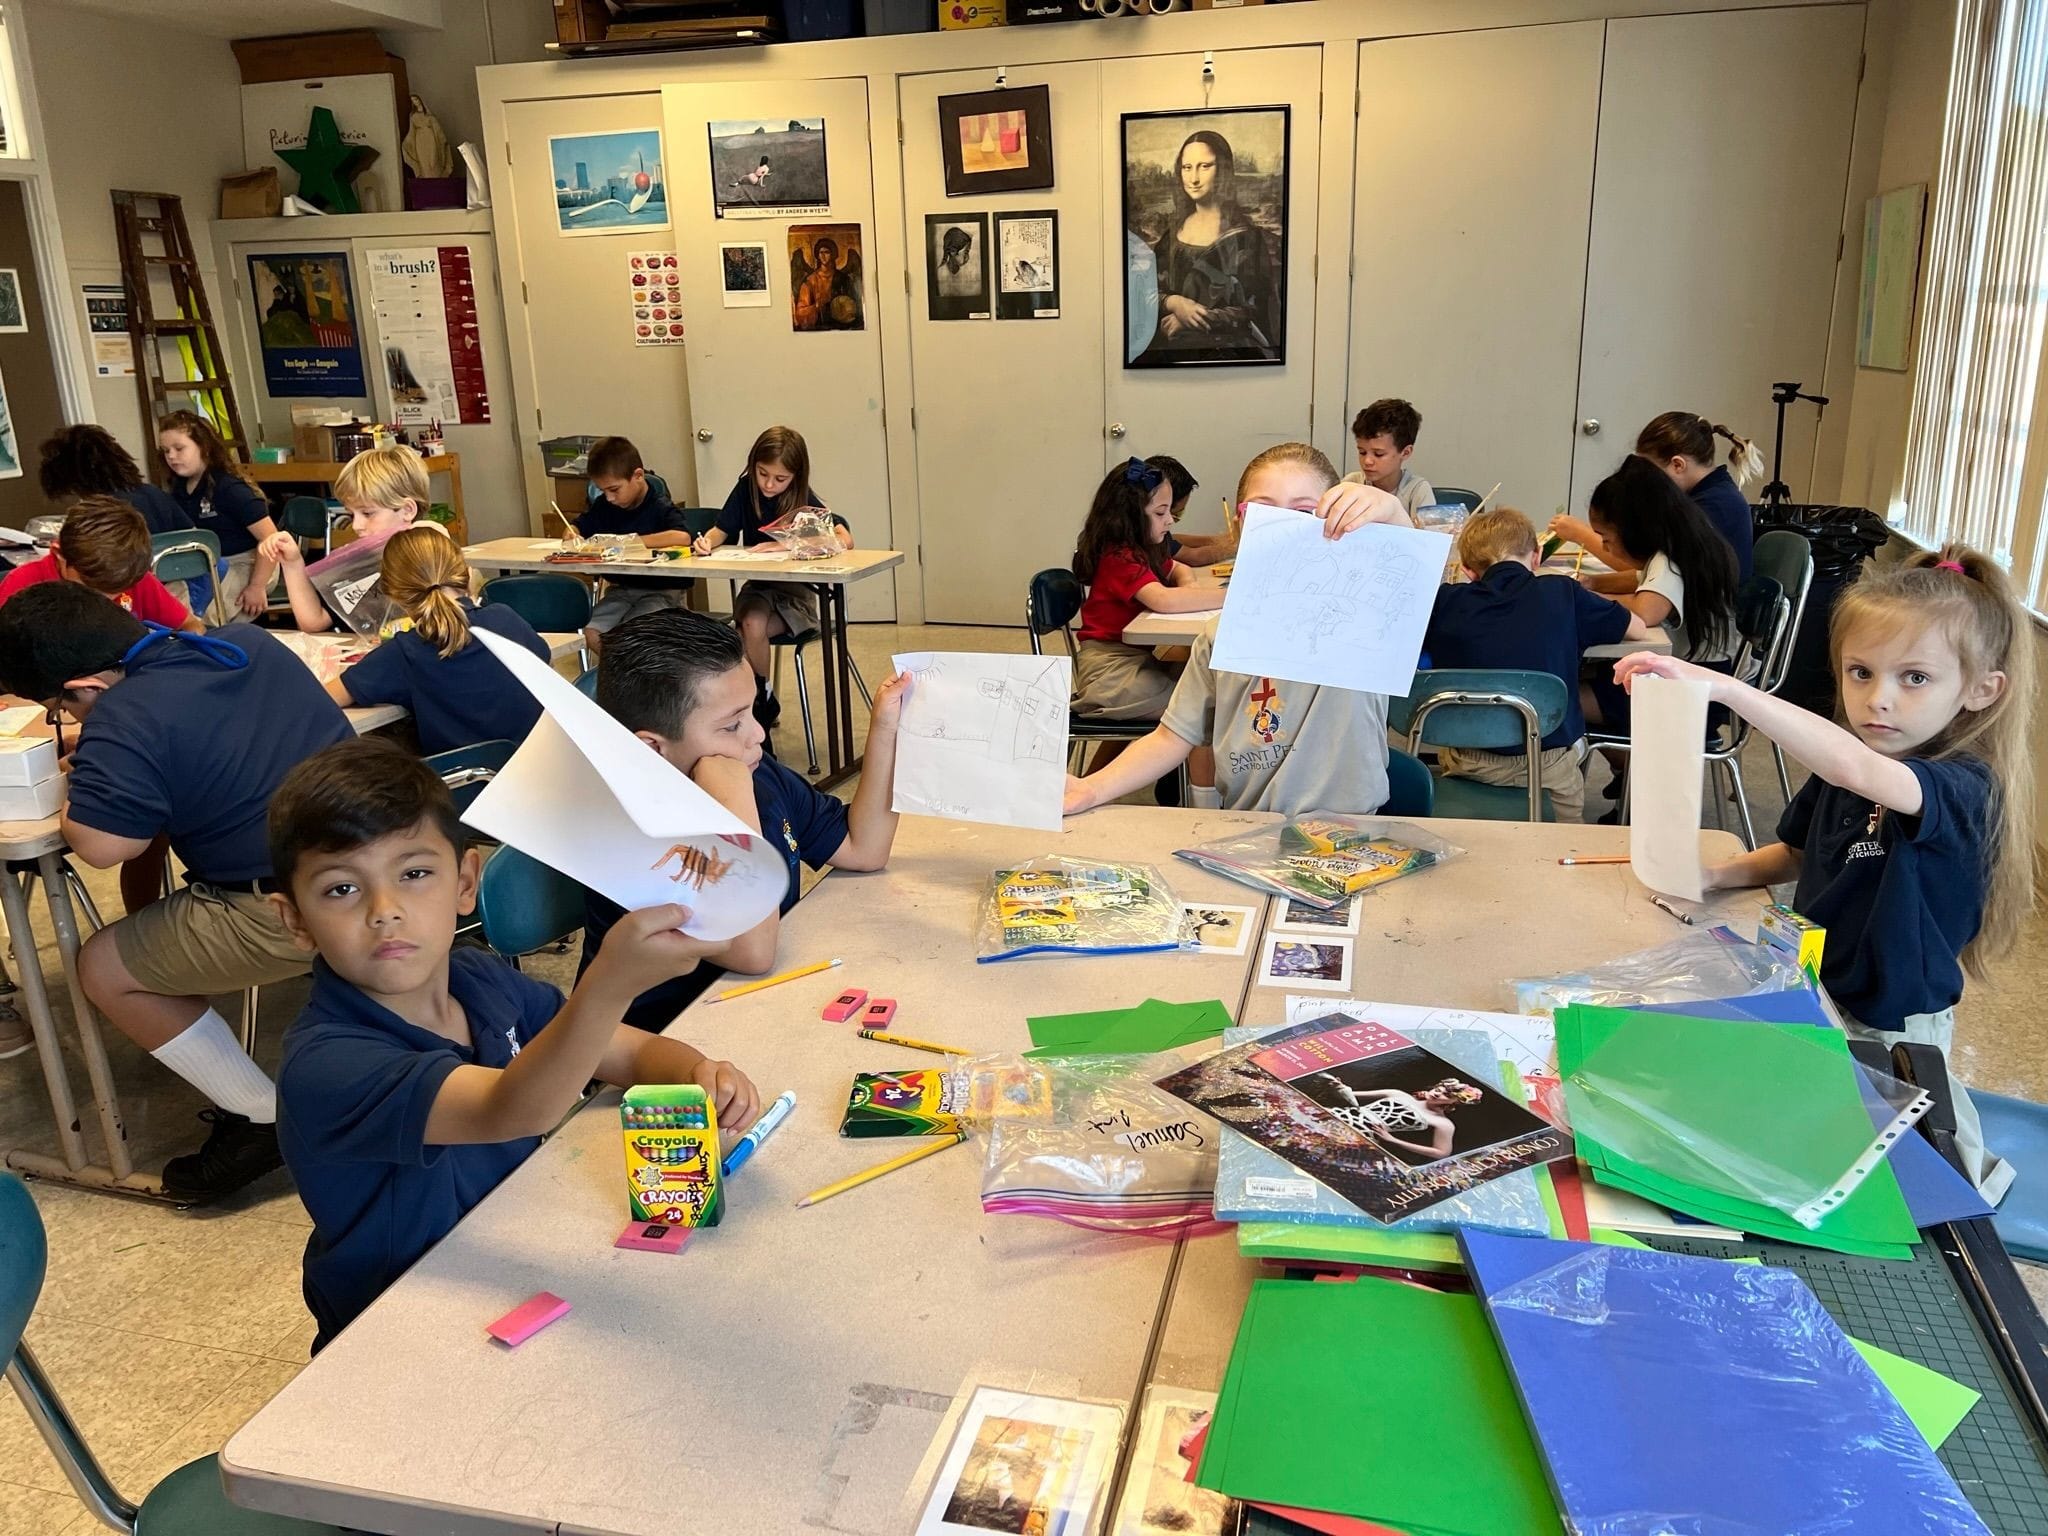 Students work on various art projects with Dr. Scelza.